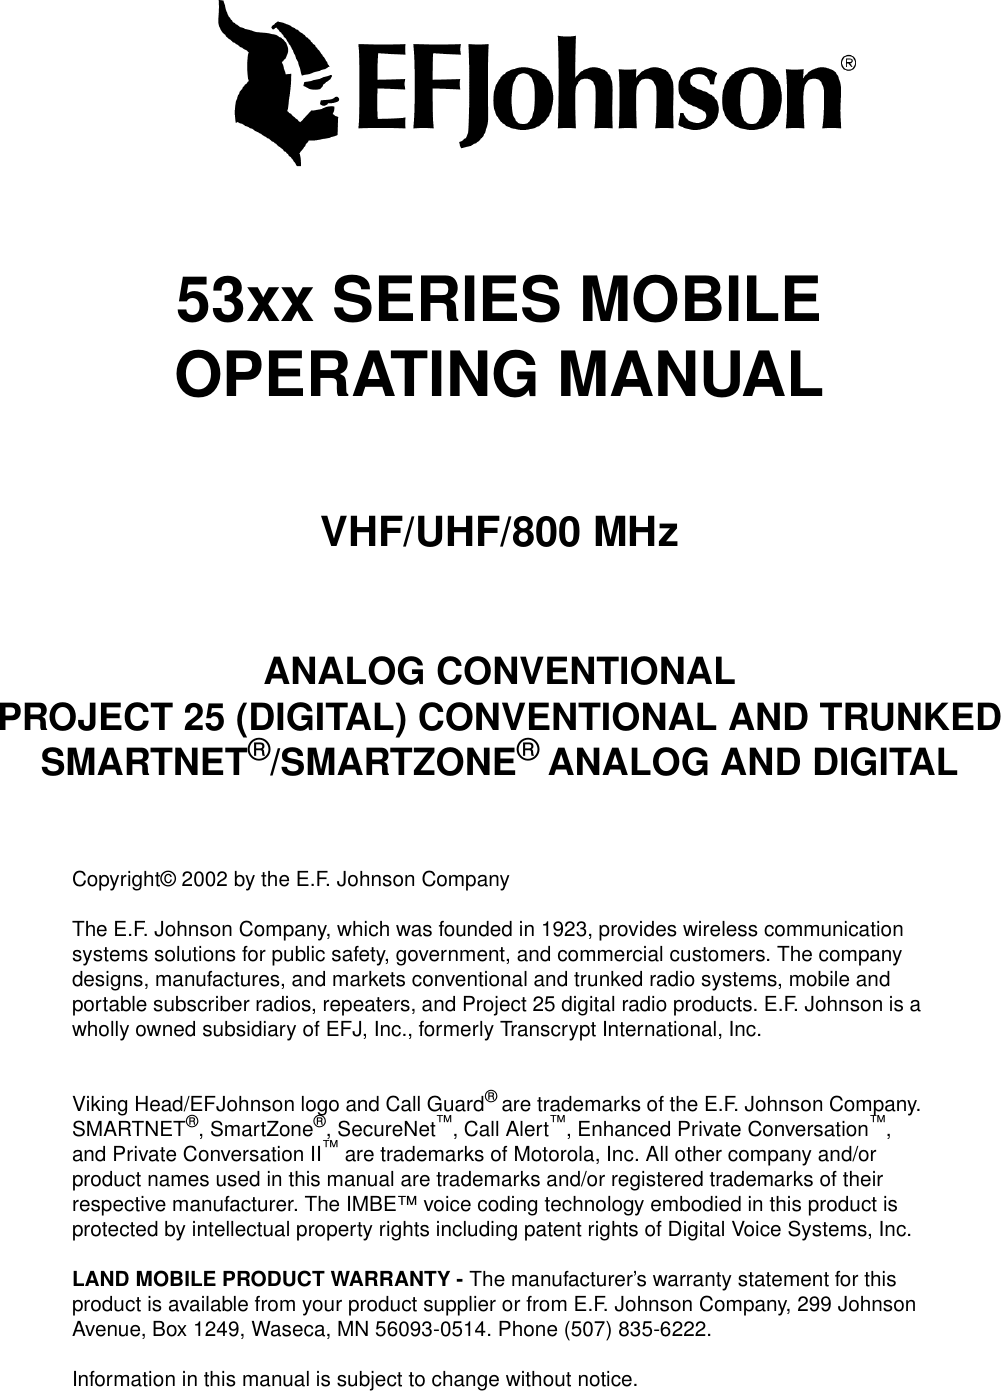 53xx SERIES MOBILEOPERATING MANUALVHF/UHF/800 MHzANALOG CONVENTIONALPROJECT 25 (DIGITAL) CONVENTIONAL AND TRUNKEDSMARTNET®/SMARTZONE® ANALOG AND DIGITALCopyright© 2002 by the E.F. Johnson CompanyThe E.F. Johnson Company, which was founded in 1923, provides wireless communication systems solutions for public safety, government, and commercial customers. The company designs, manufactures, and markets conventional and trunked radio systems, mobile and portable subscriber radios, repeaters, and Project 25 digital radio products. E.F. Johnson is a wholly owned subsidiary of EFJ, Inc., formerly Transcrypt International, Inc.Viking Head/EFJohnson logo and Call Guard® are trademarks of the E.F. Johnson Company. SMARTNET®, SmartZone®, SecureNet™, Call Alert™, Enhanced Private Conversation™, and Private Conversation II™ are trademarks of Motorola, Inc. All other company and/or product names used in this manual are trademarks and/or registered trademarks of their respective manufacturer. The IMBE™ voice coding technology embodied in this product is protected by intellectual property rights including patent rights of Digital Voice Systems, Inc.LAND MOBILE PRODUCT WARRANTY - The manufacturer’s warranty statement for this product is available from your product supplier or from E.F. Johnson Company, 299 Johnson Avenue, Box 1249, Waseca, MN 56093-0514. Phone (507) 835-6222.Information in this manual is subject to change without notice. 